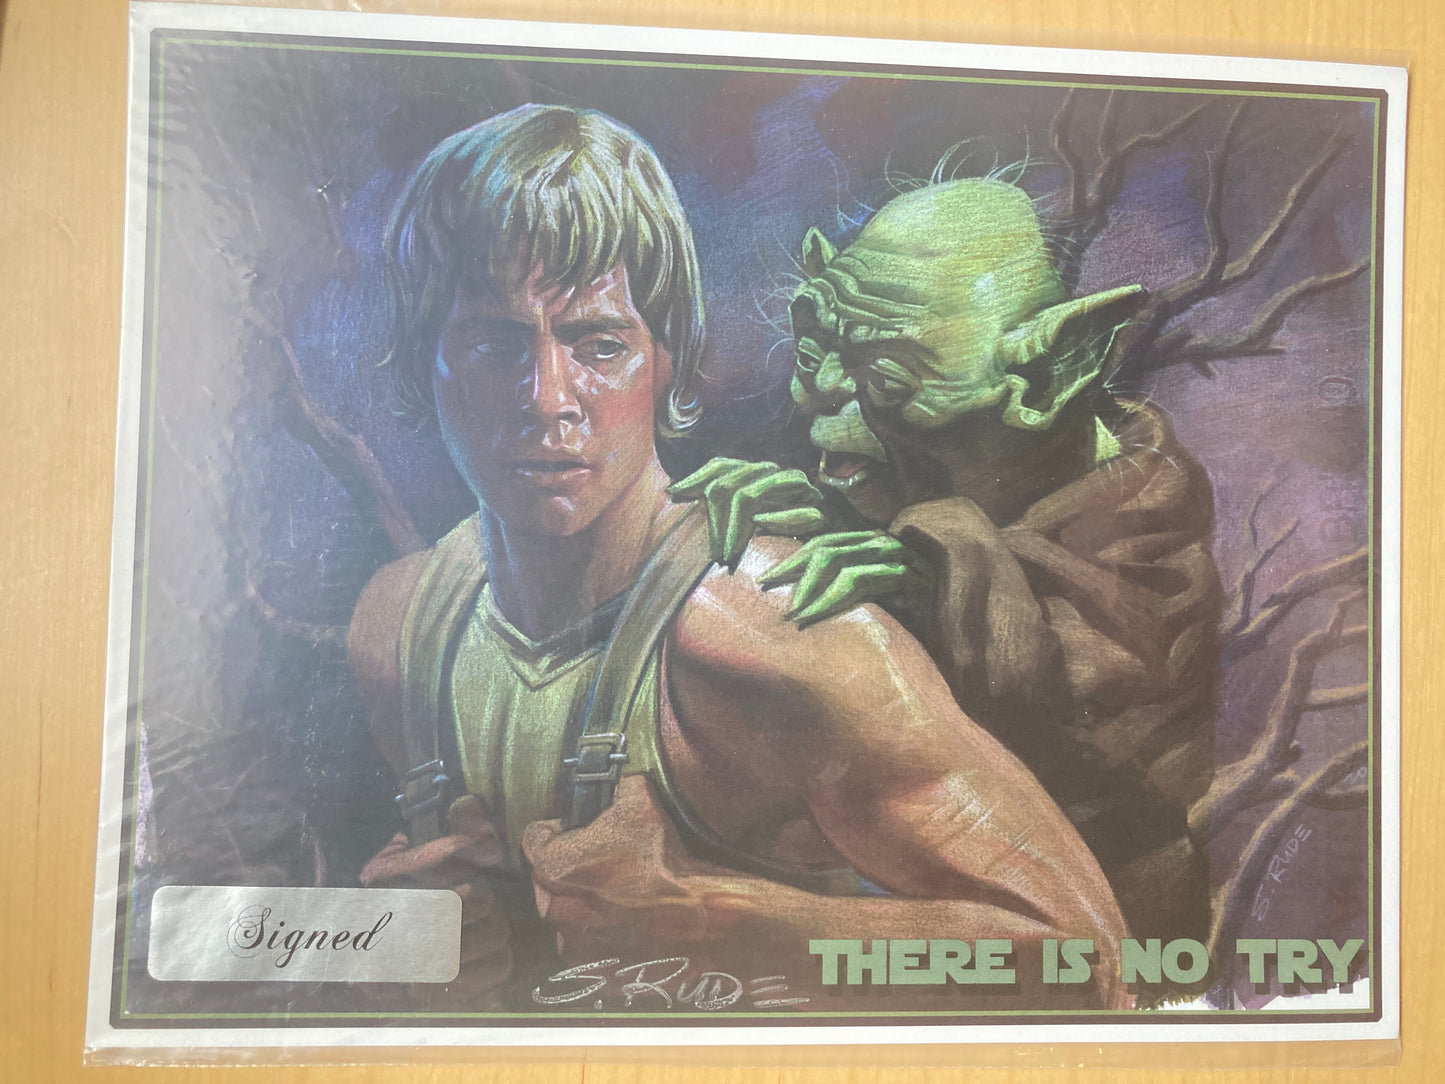 Luke & Yoda "There is no Try" 8½" x 11" Print